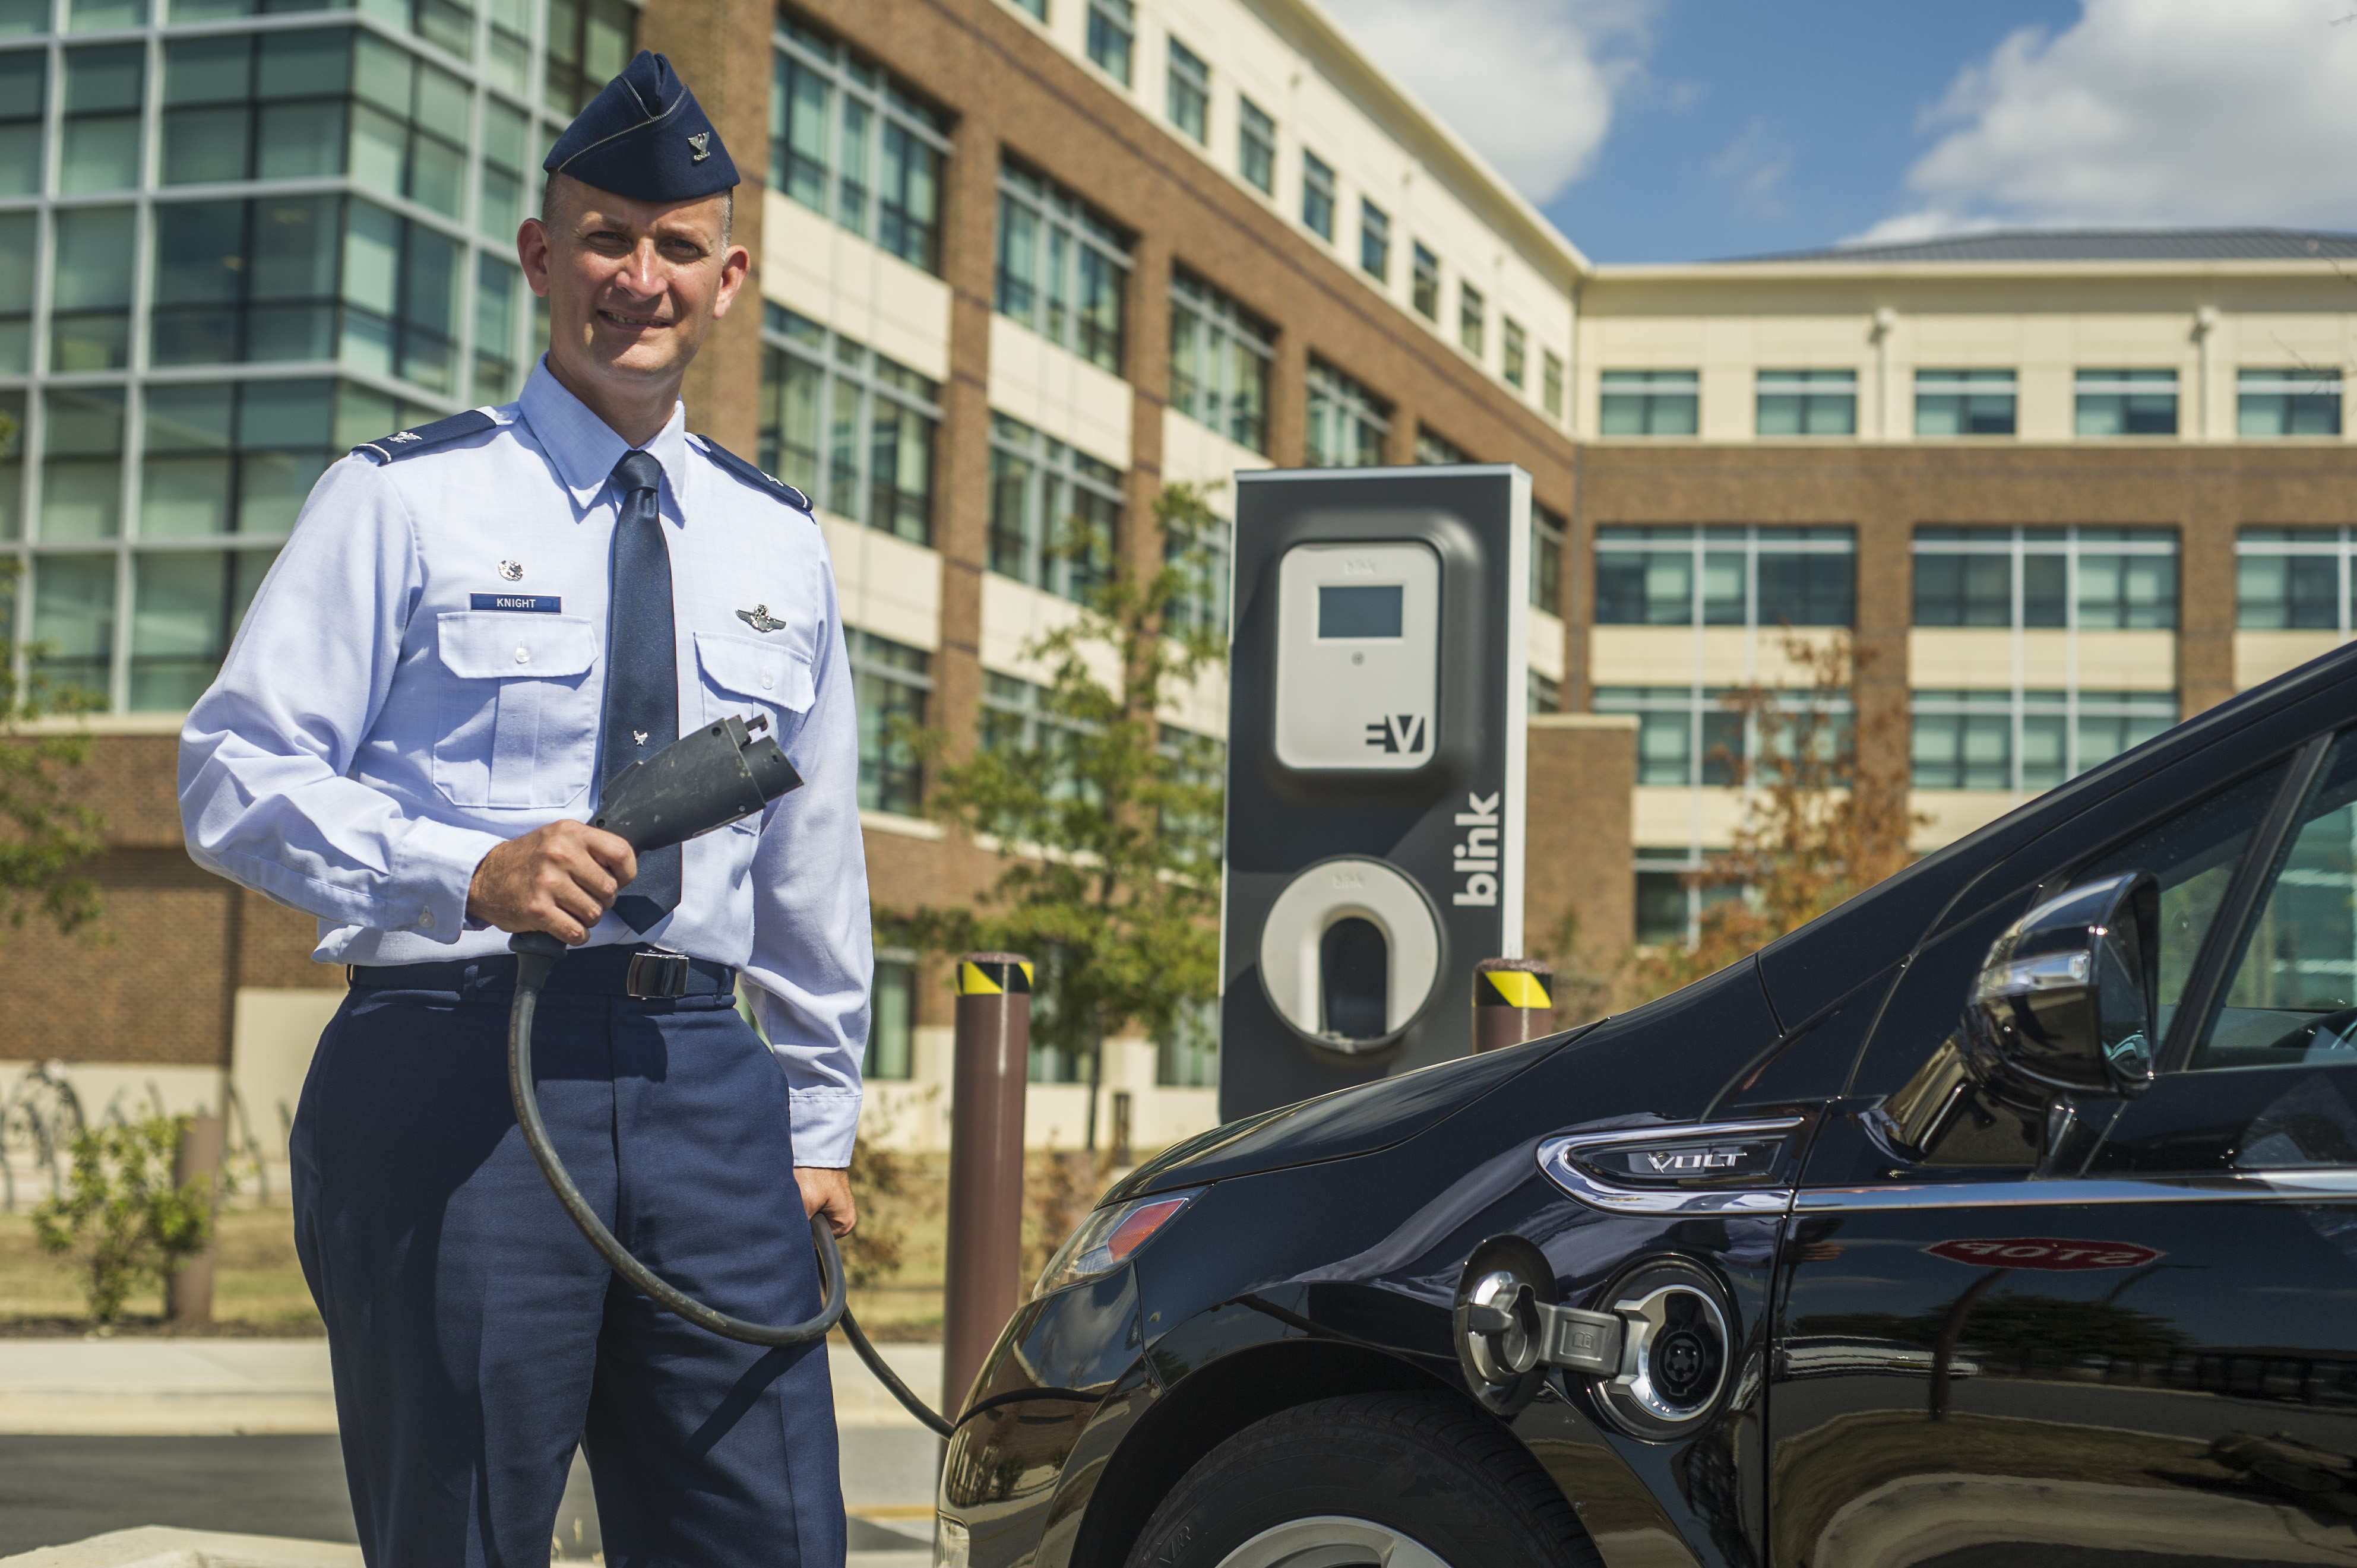 Join Base Andrews in Maryland is replacing its entire passenger vehicle fleet with electric cars